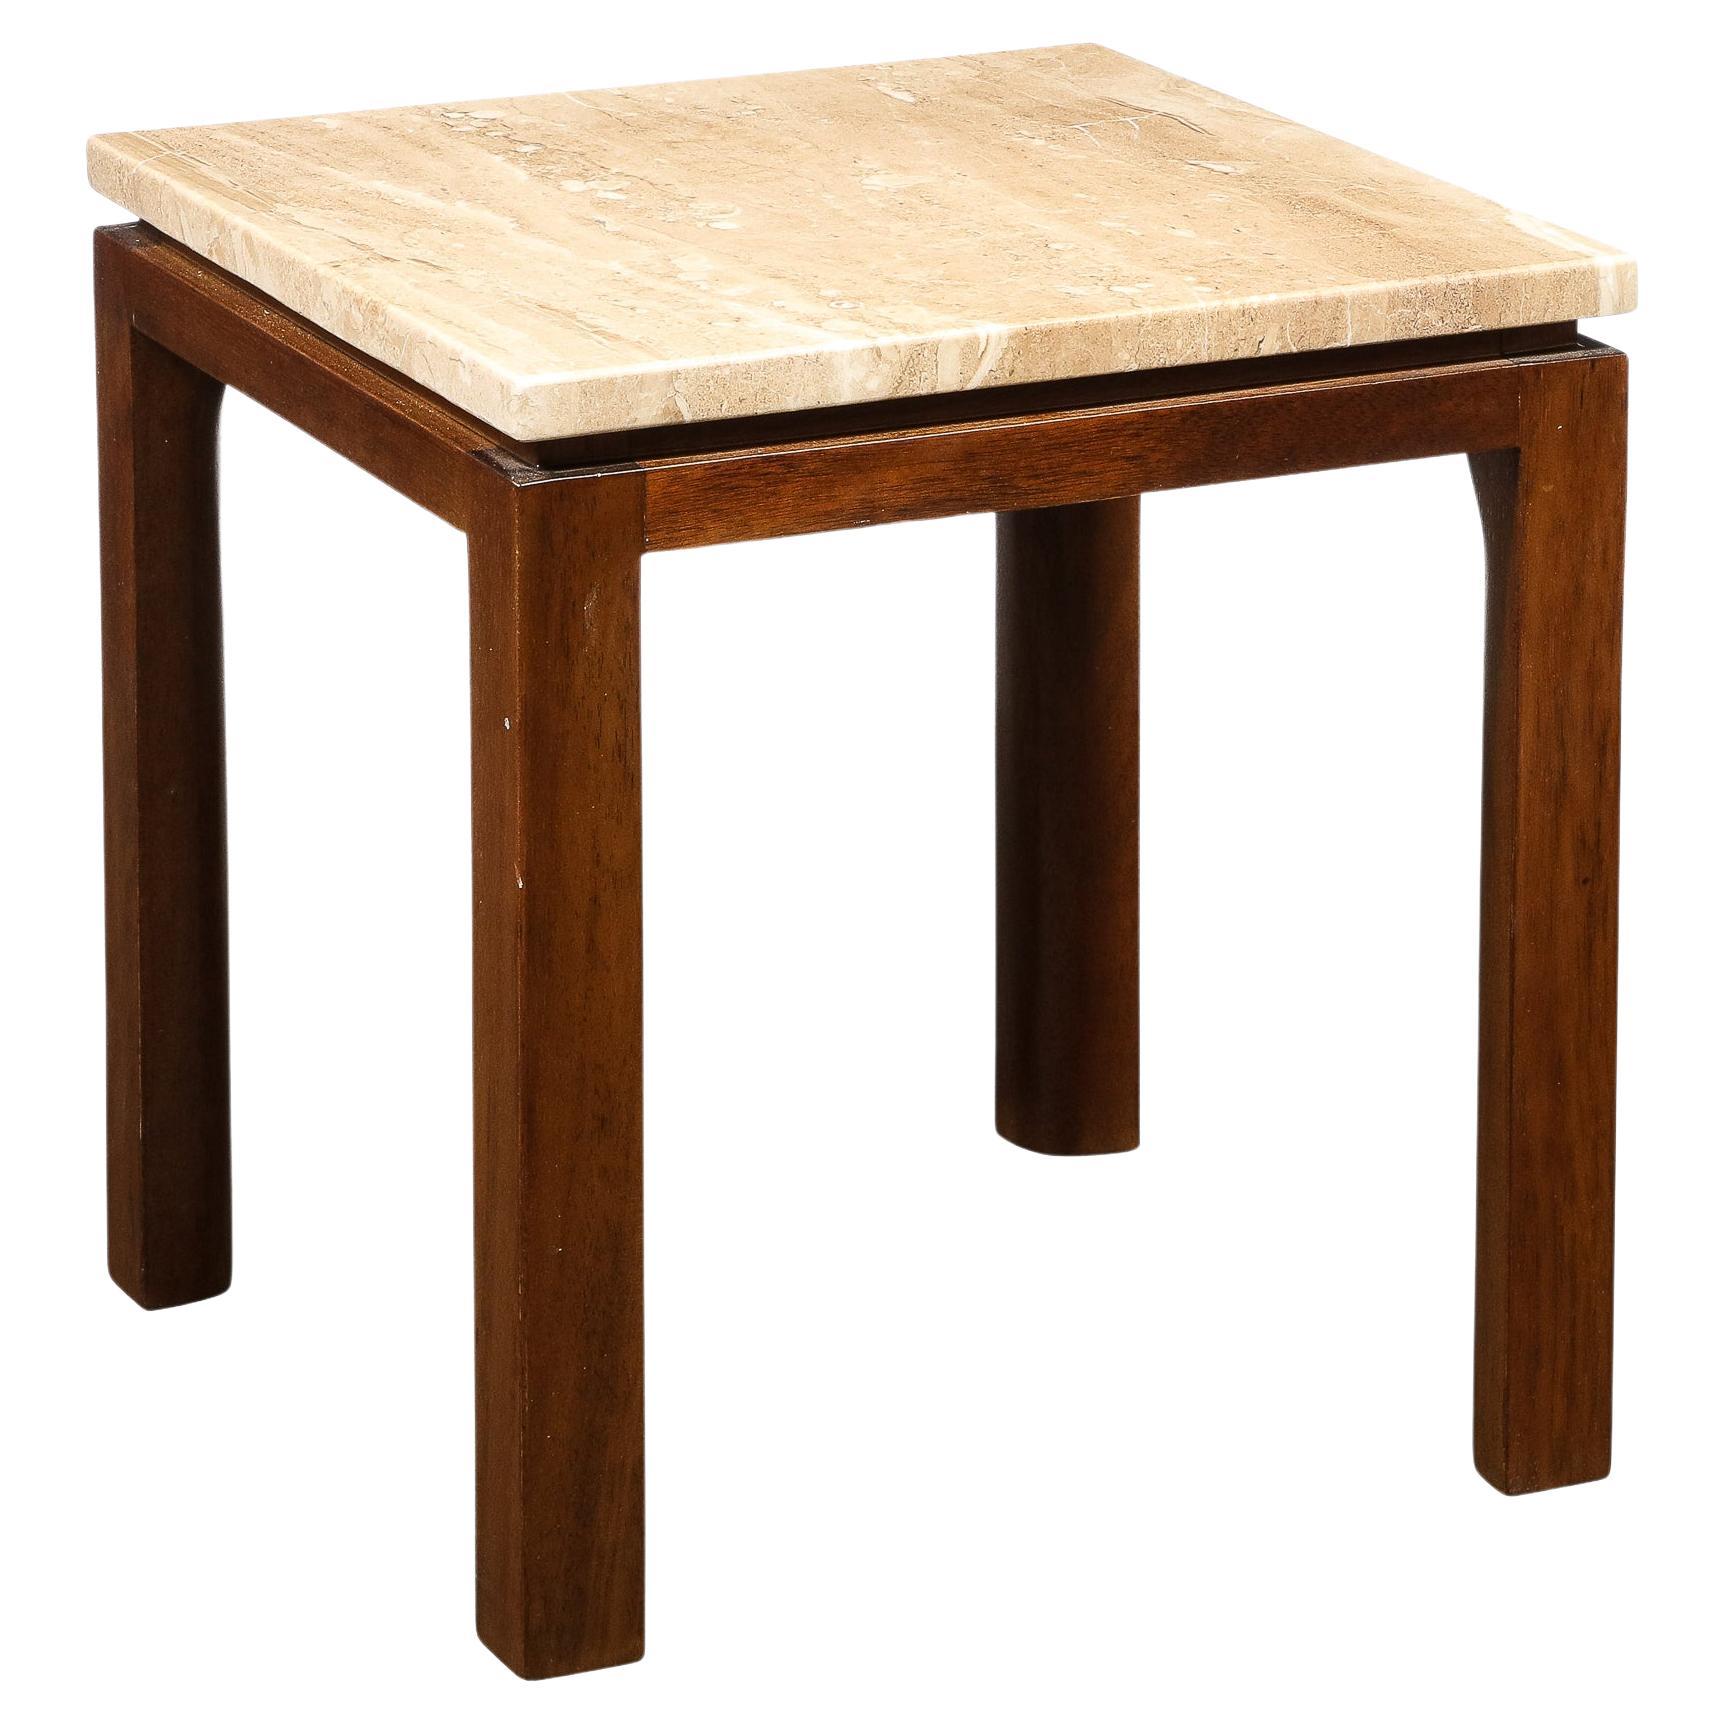 Mid-Century Modernist Side Table in Walnut & Travertine Marble by Harvey Probber For Sale